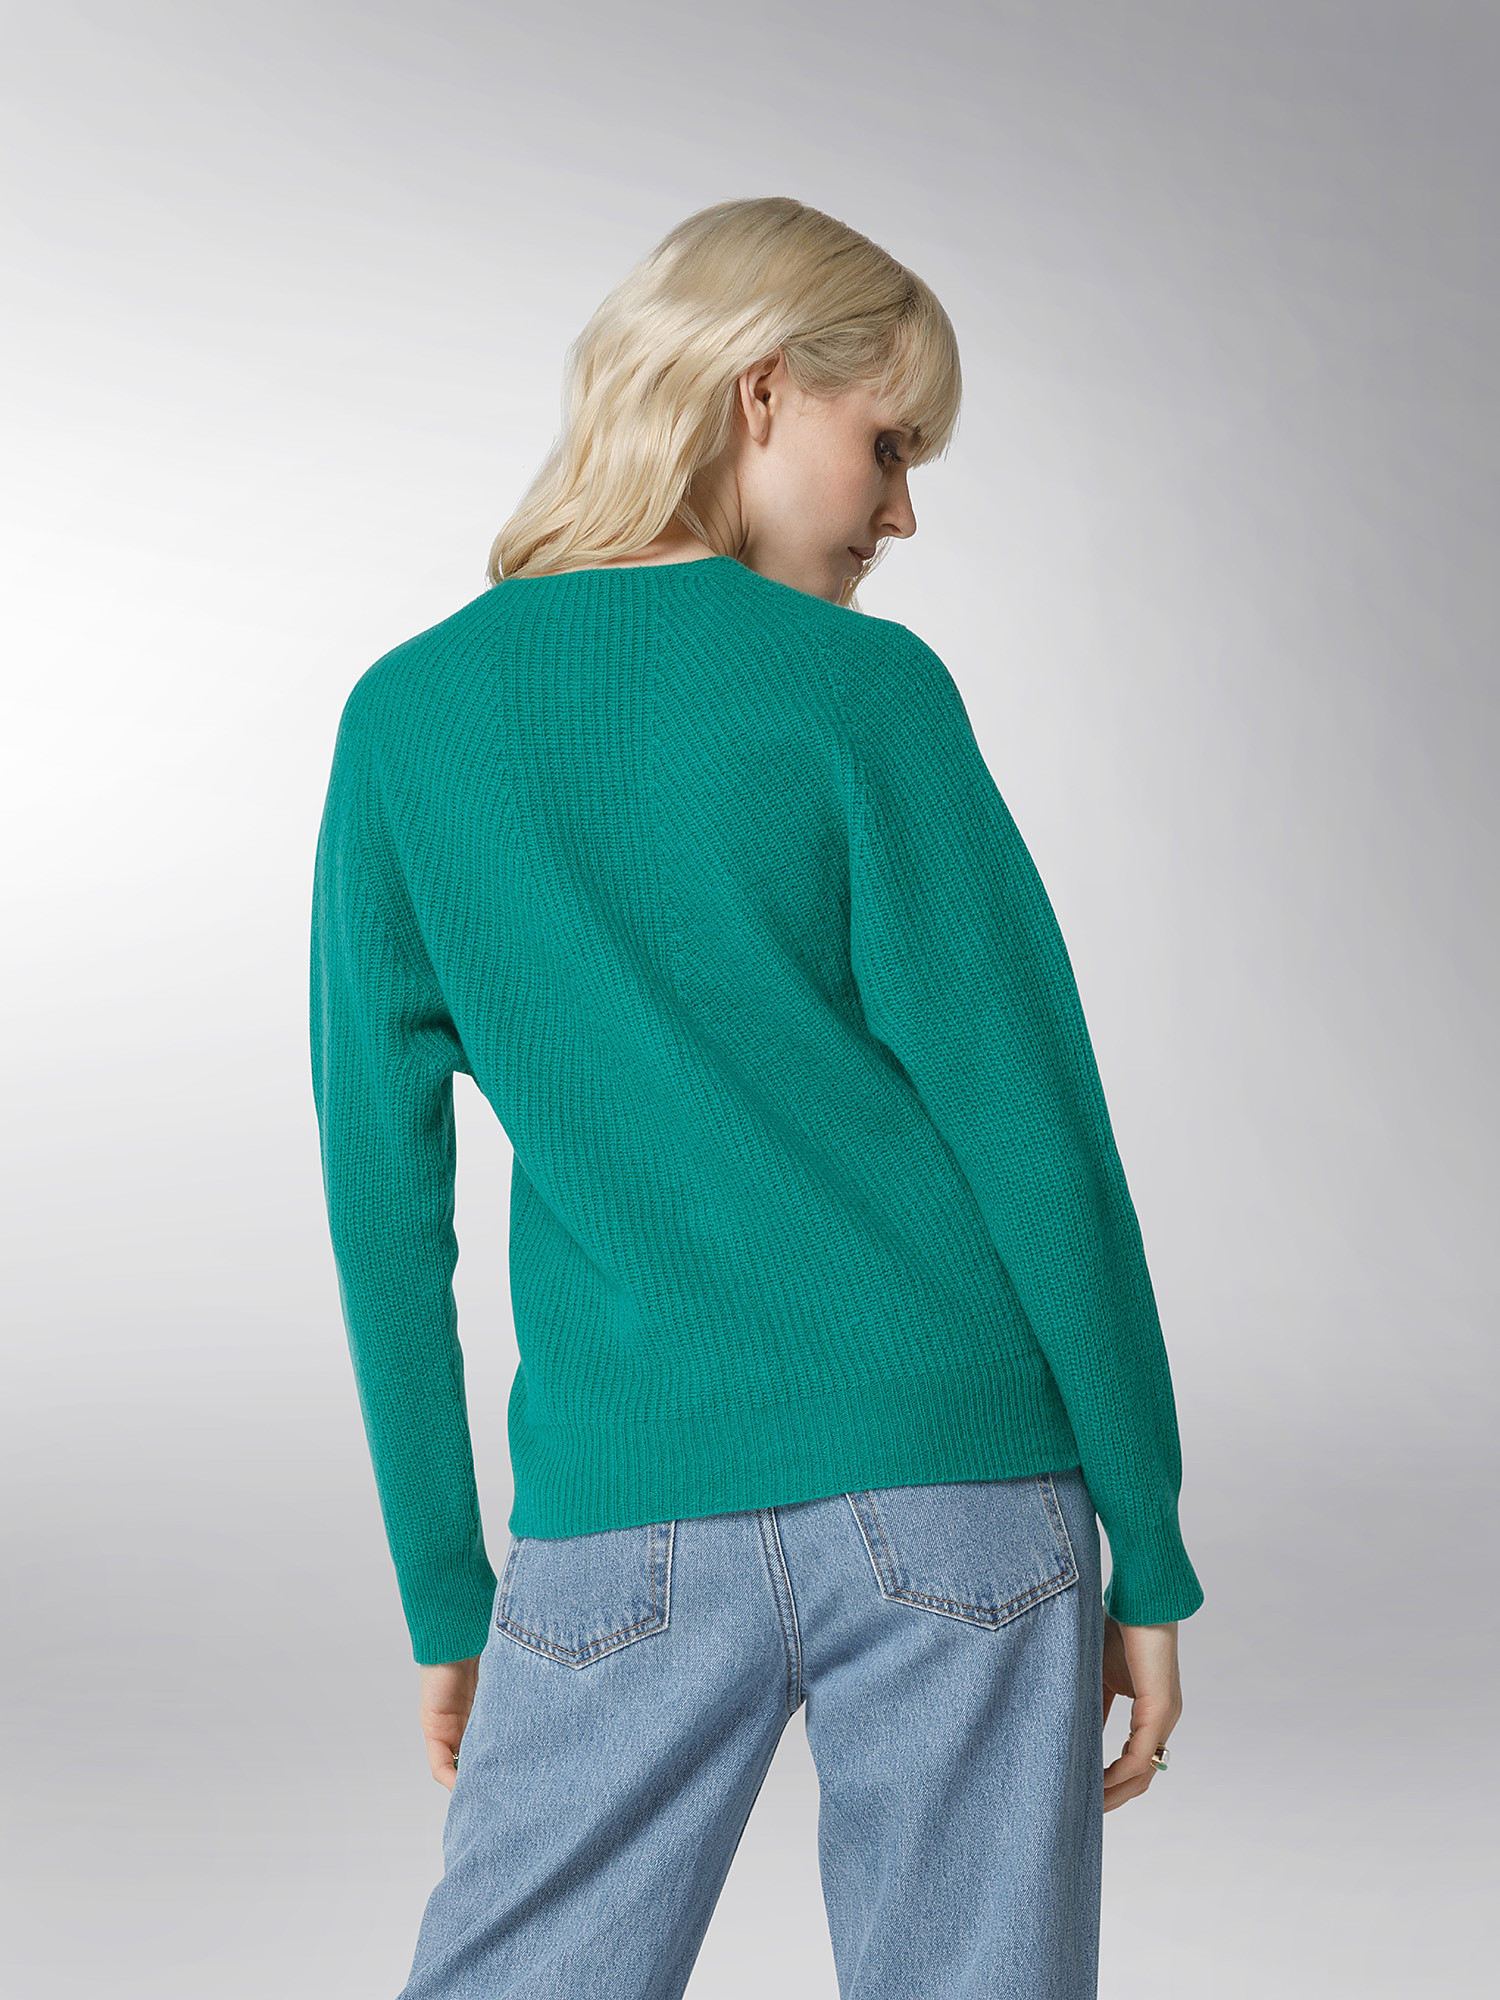 K Collection - Cardigan, Green, large image number 4